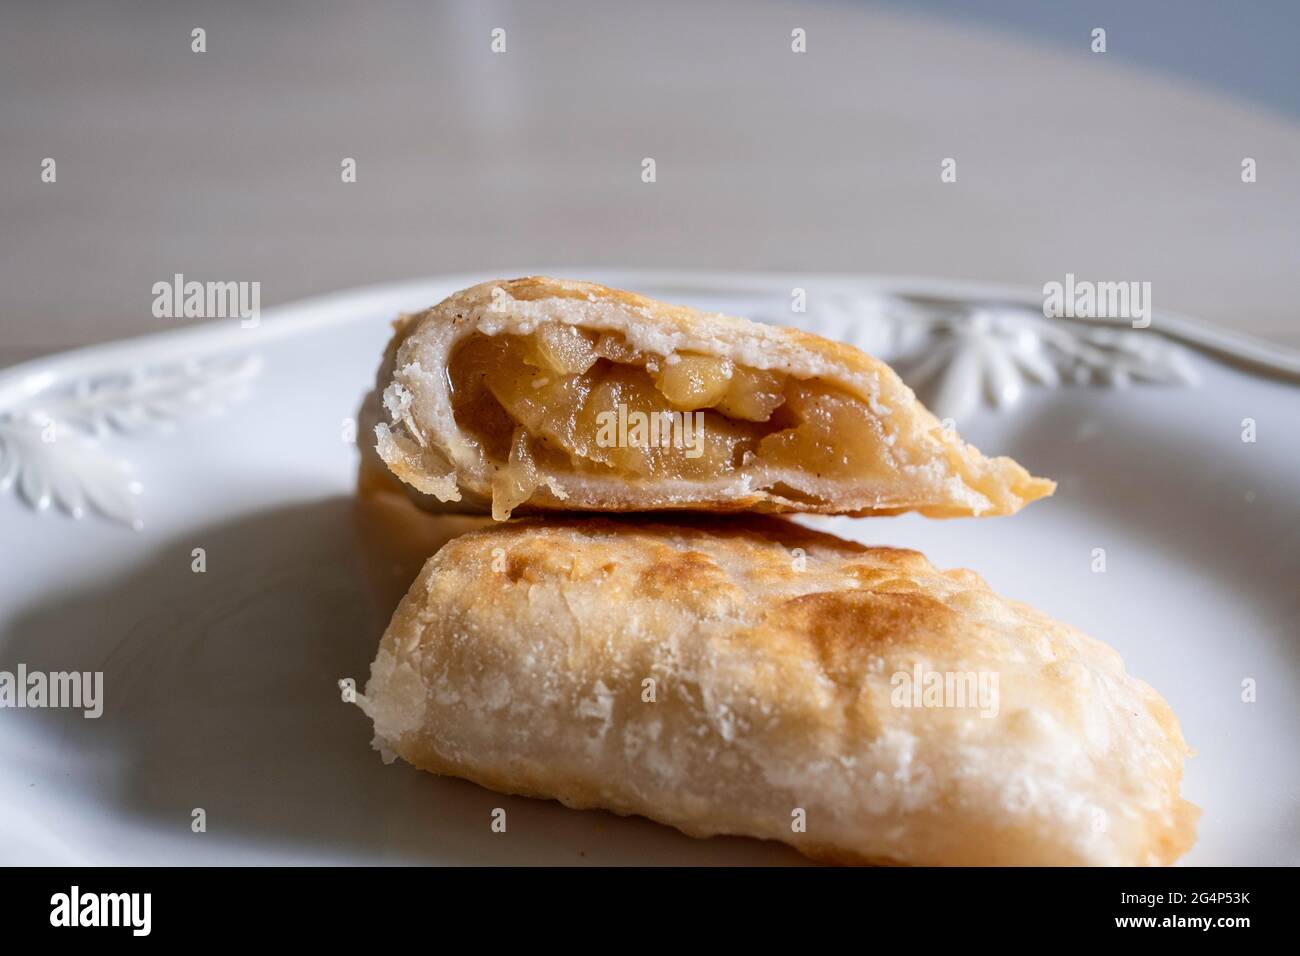 Homemade fried apple pie cut in half made from dried apples with flaky  pie crust on a white plate. Stock Photo